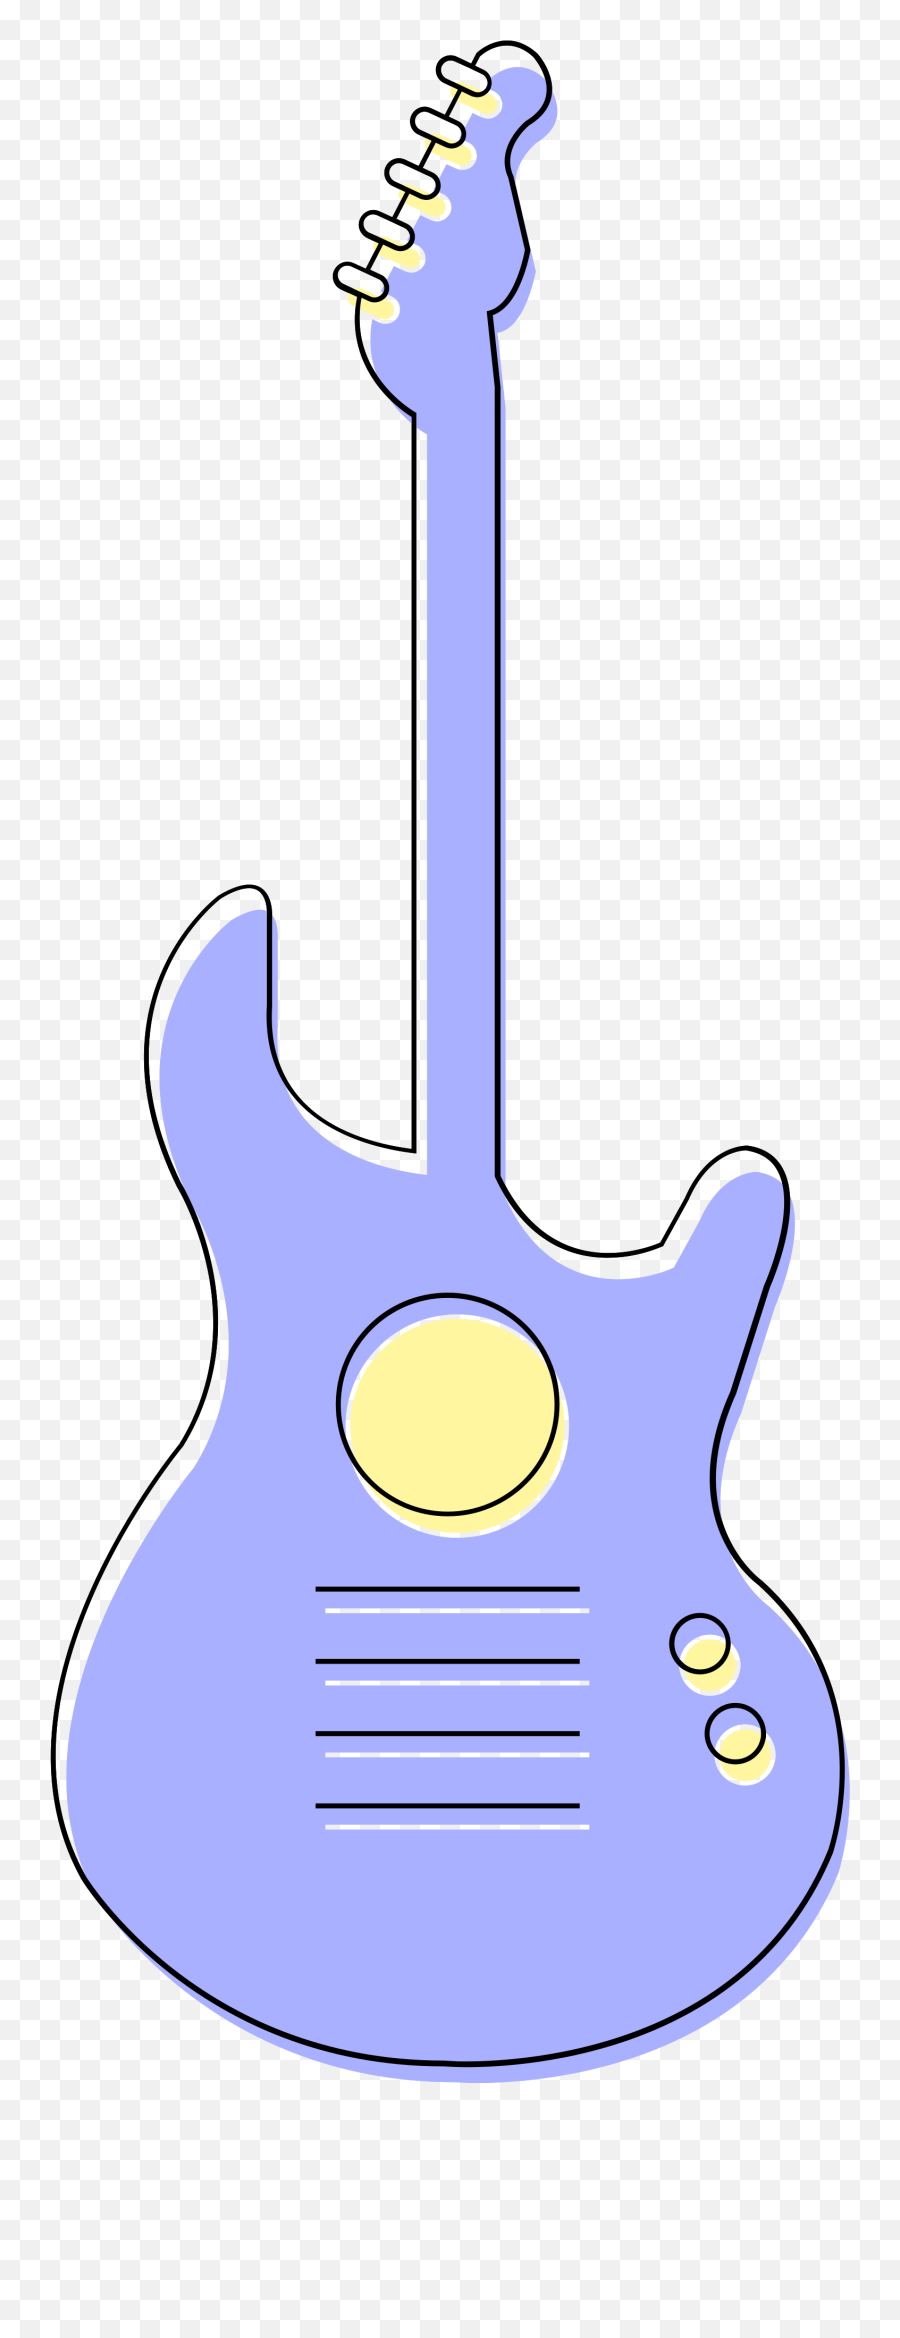 Free Music Guitar 1206364 Png With Transparent Background - Solid Emoji,Guitar Transparent Background